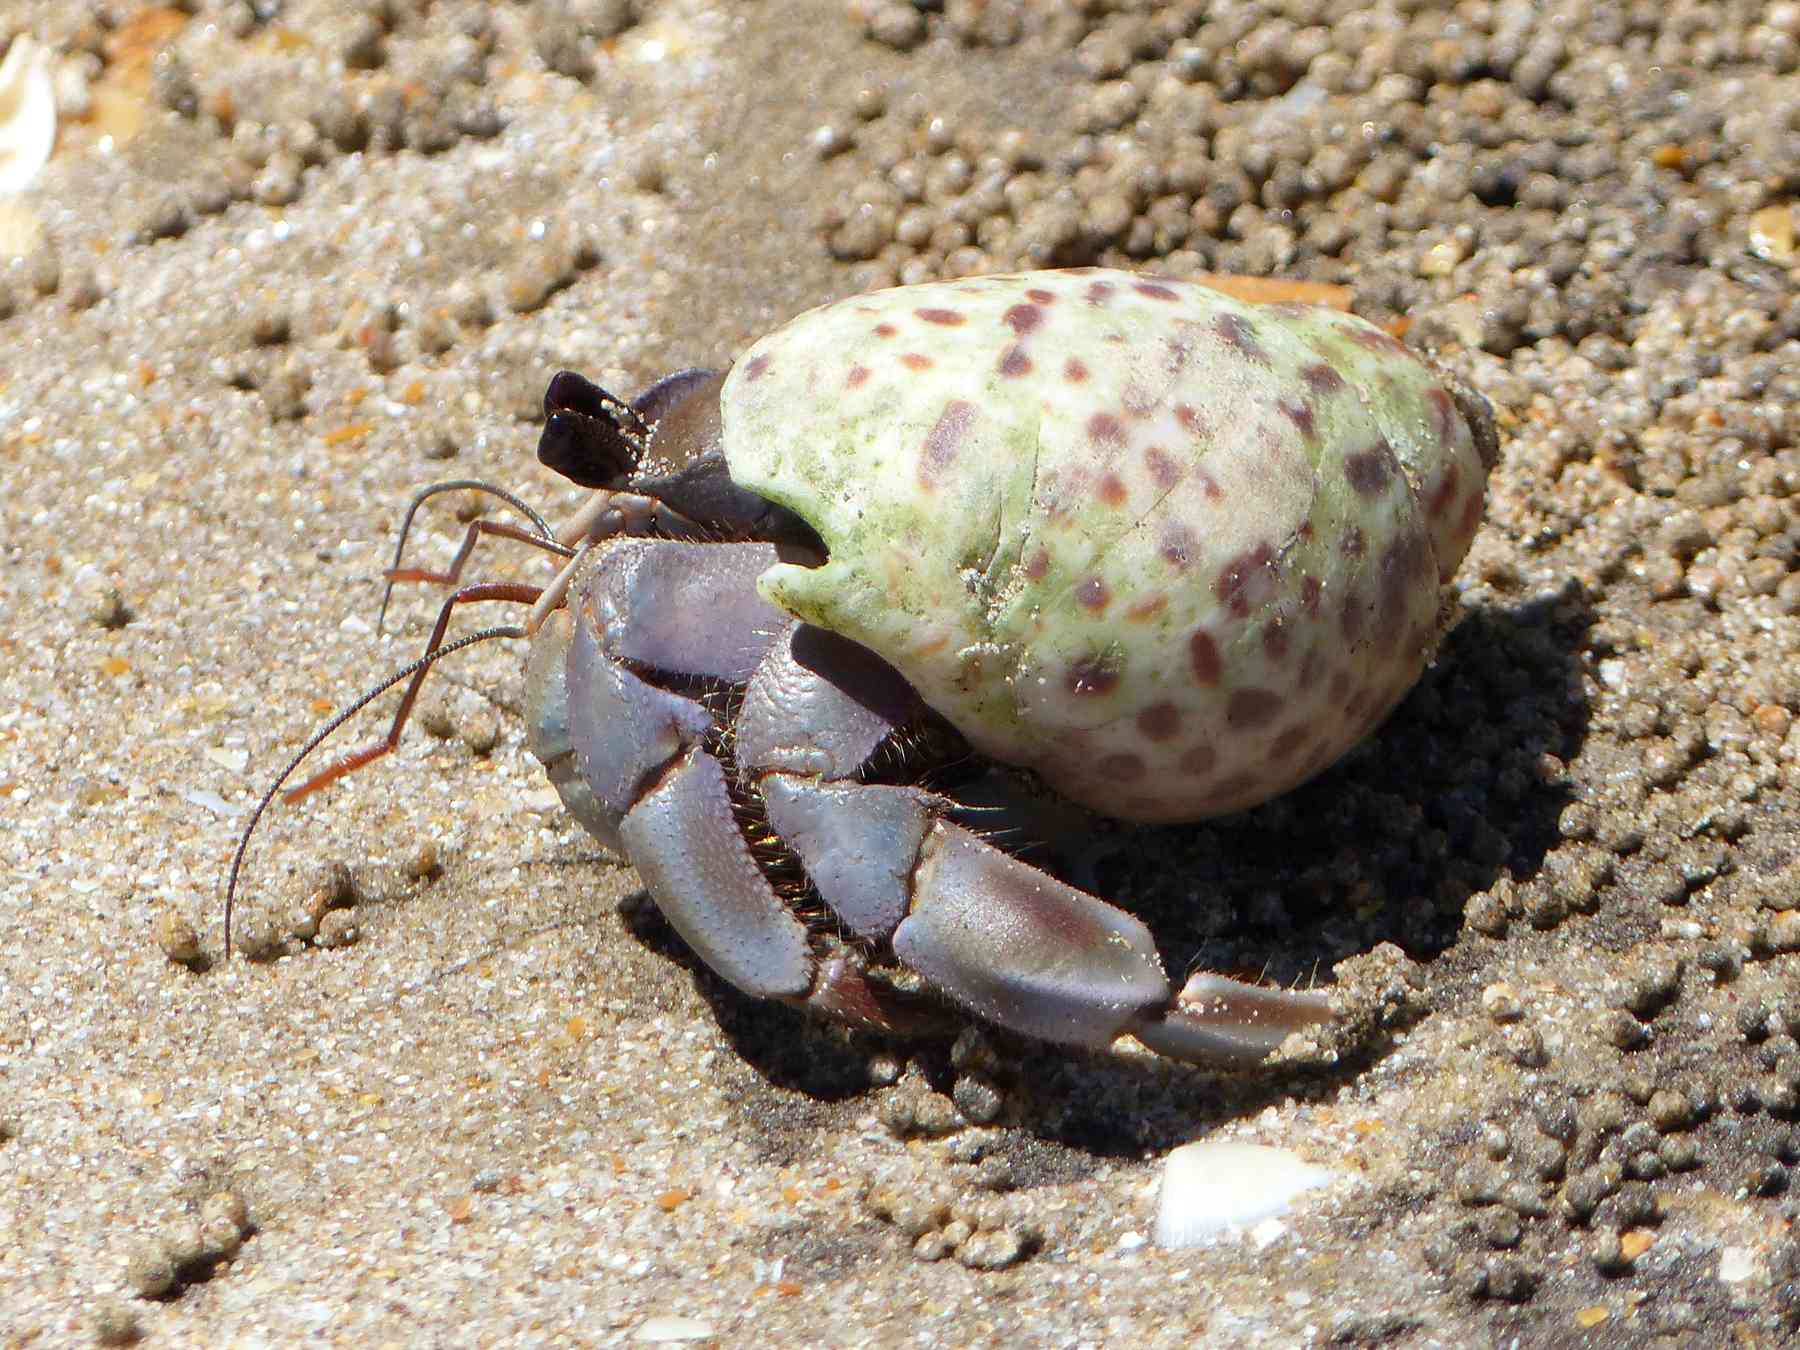 A hermit crab on the beach at Bako National Park